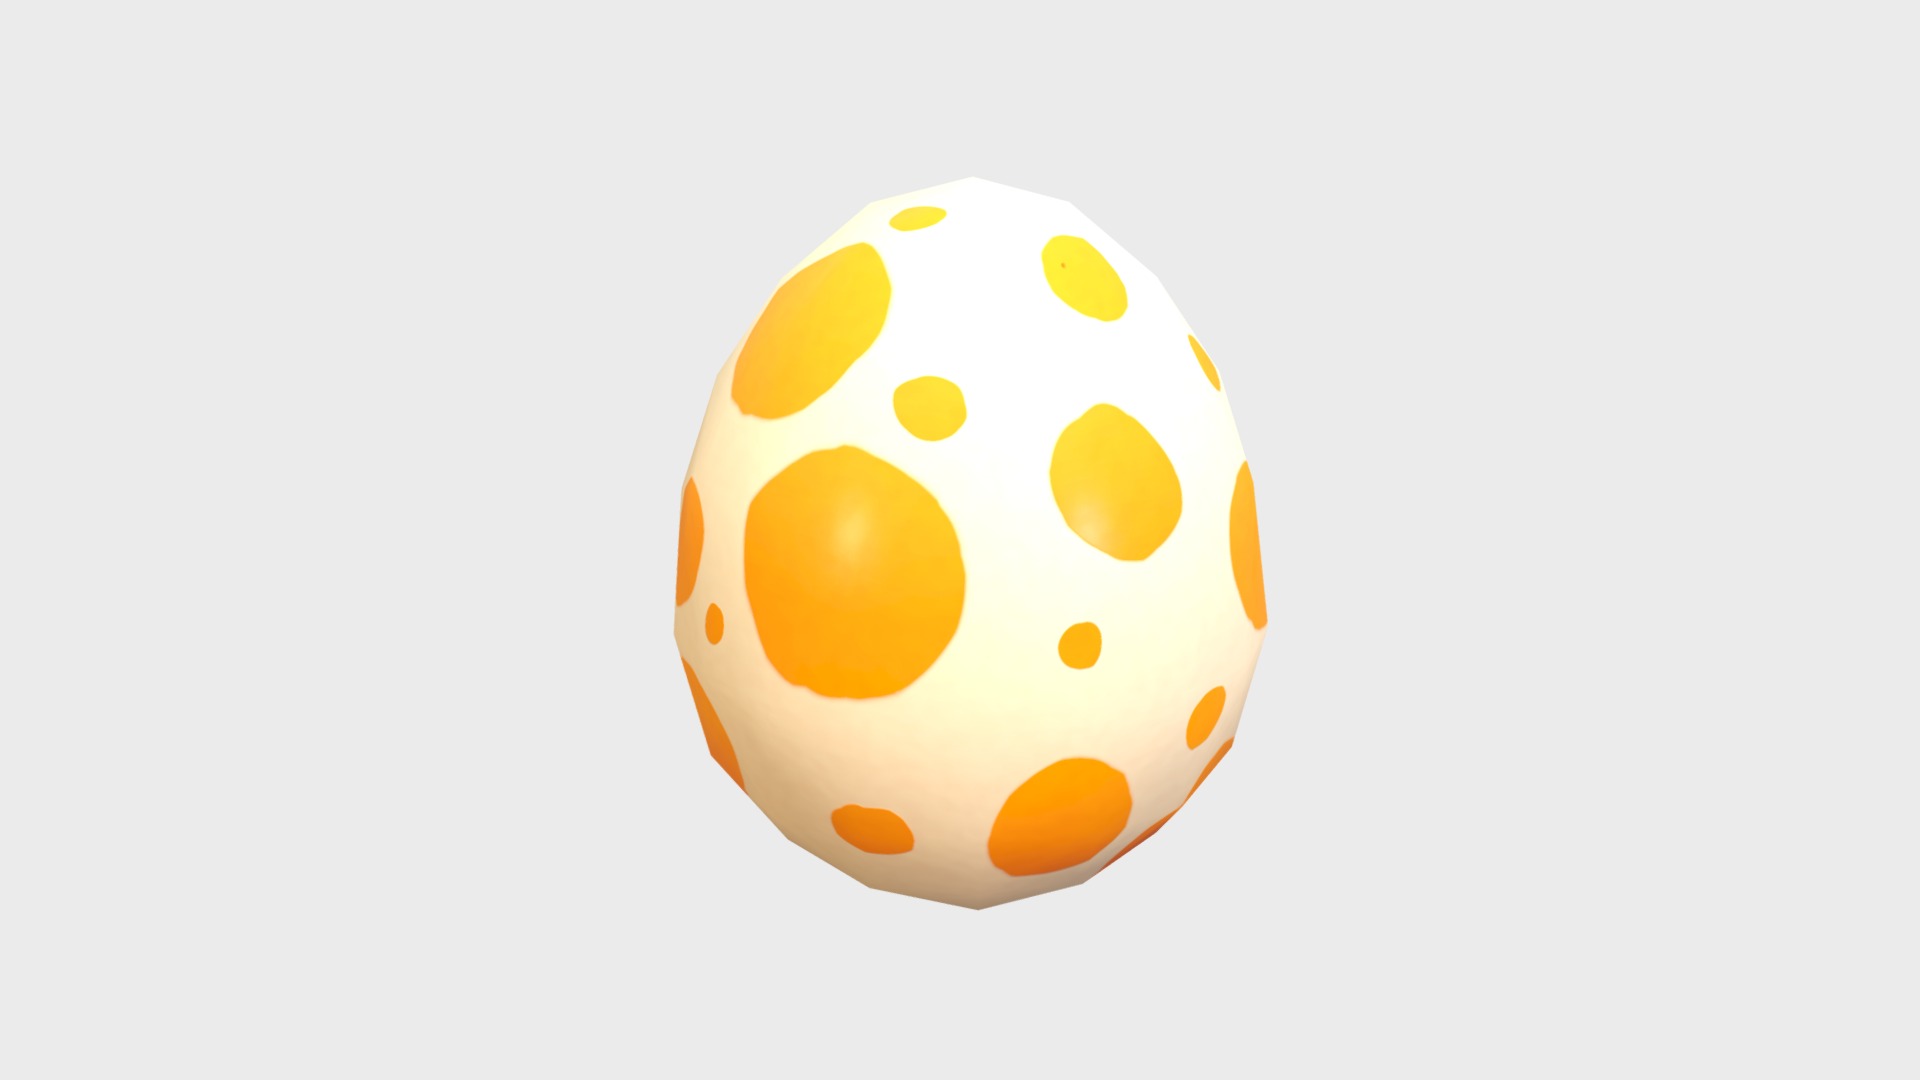 3D model Dinosaur Egg - This is a 3D model of the Dinosaur Egg. The 3D model is about a round white object with orange dots.